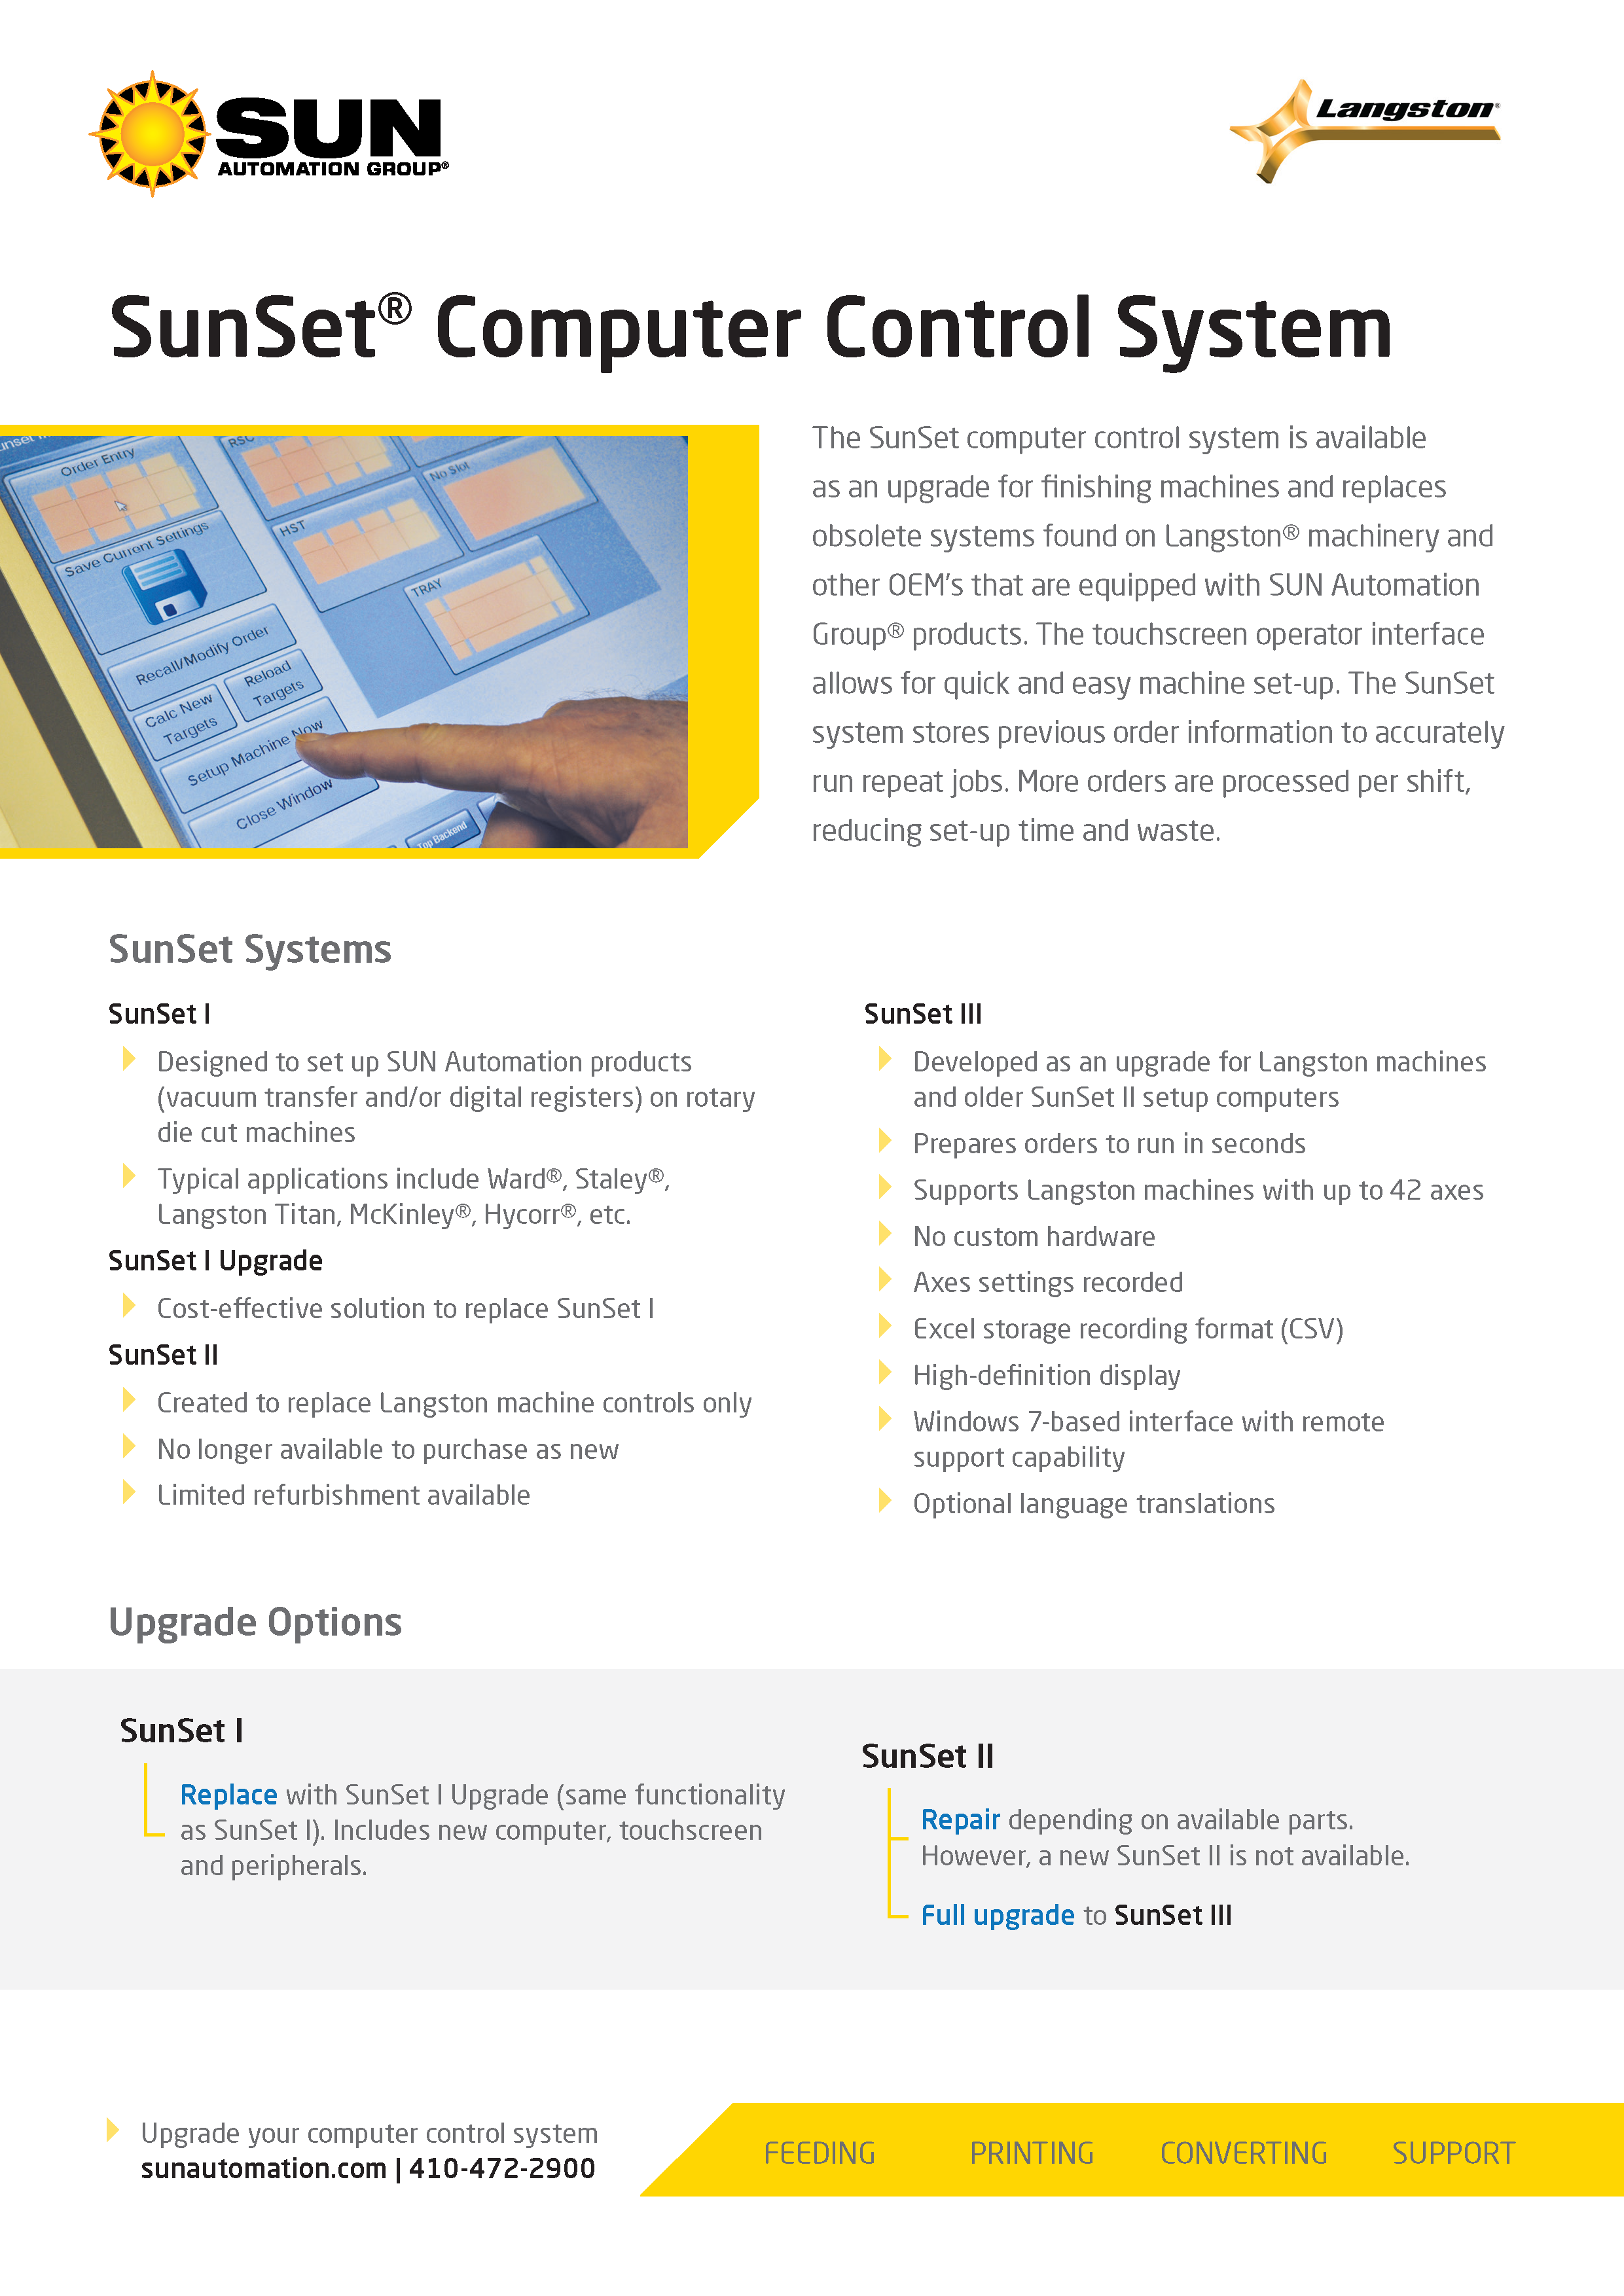 Learn more about Sun Automation Group’s SunSet Computer Control System in their brochure. 